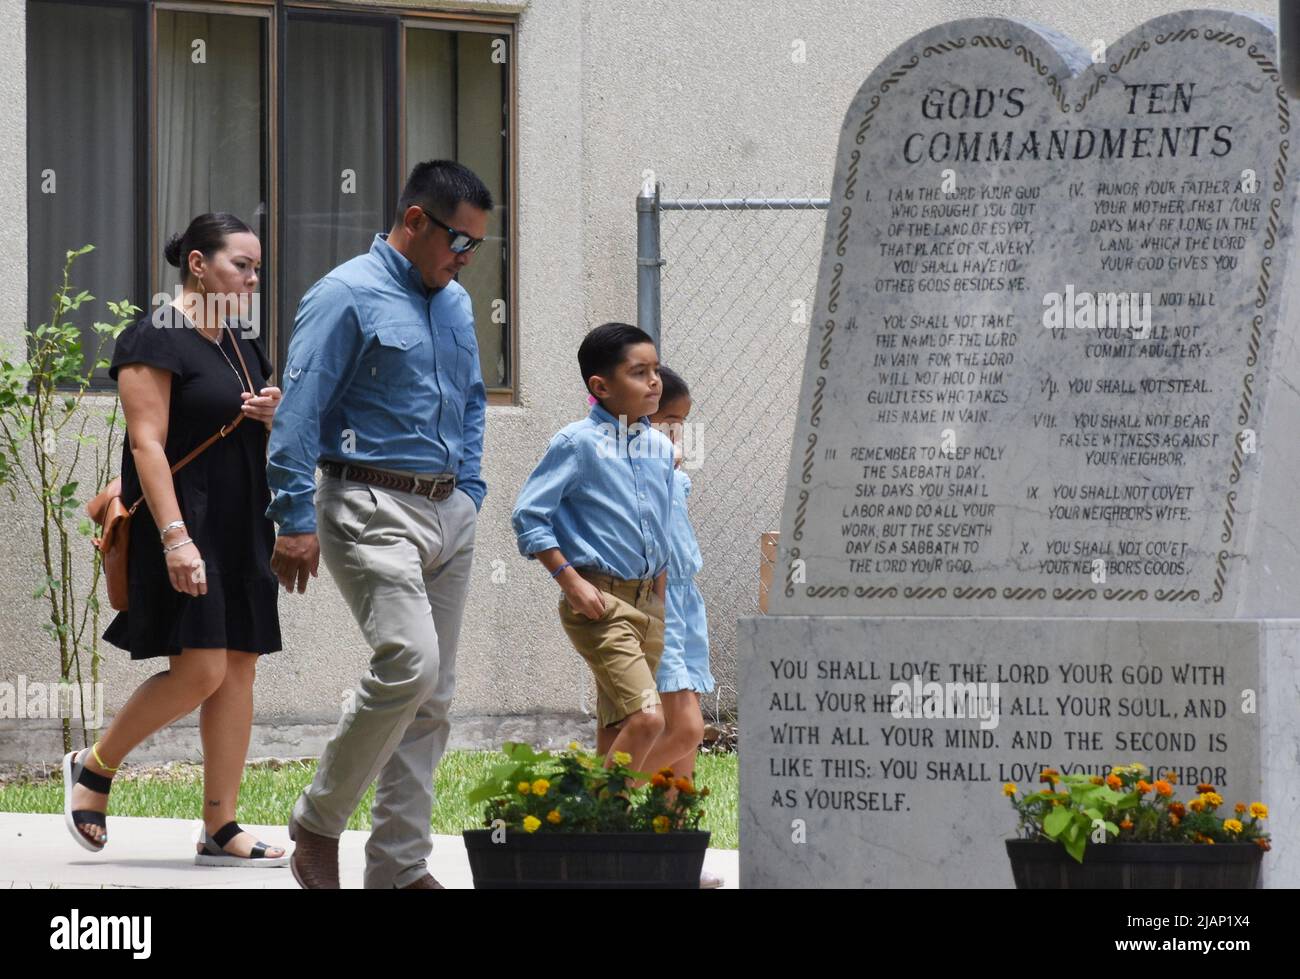 Uvalde, United States. 31st May, 2022. Mourners arrive at Sacred Heart Catholic Church before funeral services for 10 year old Uvalde school shooting victim Amerie Jo Garza after the tragedy at Robb Elementary School in Uvalde, Texas on Tuesday, May 31, 2022. A mass shooting days before left 19 children and two adults dead at the elementary school. Photo by Jon Farina/UPI Credit: UPI/Alamy Live News Stock Photo